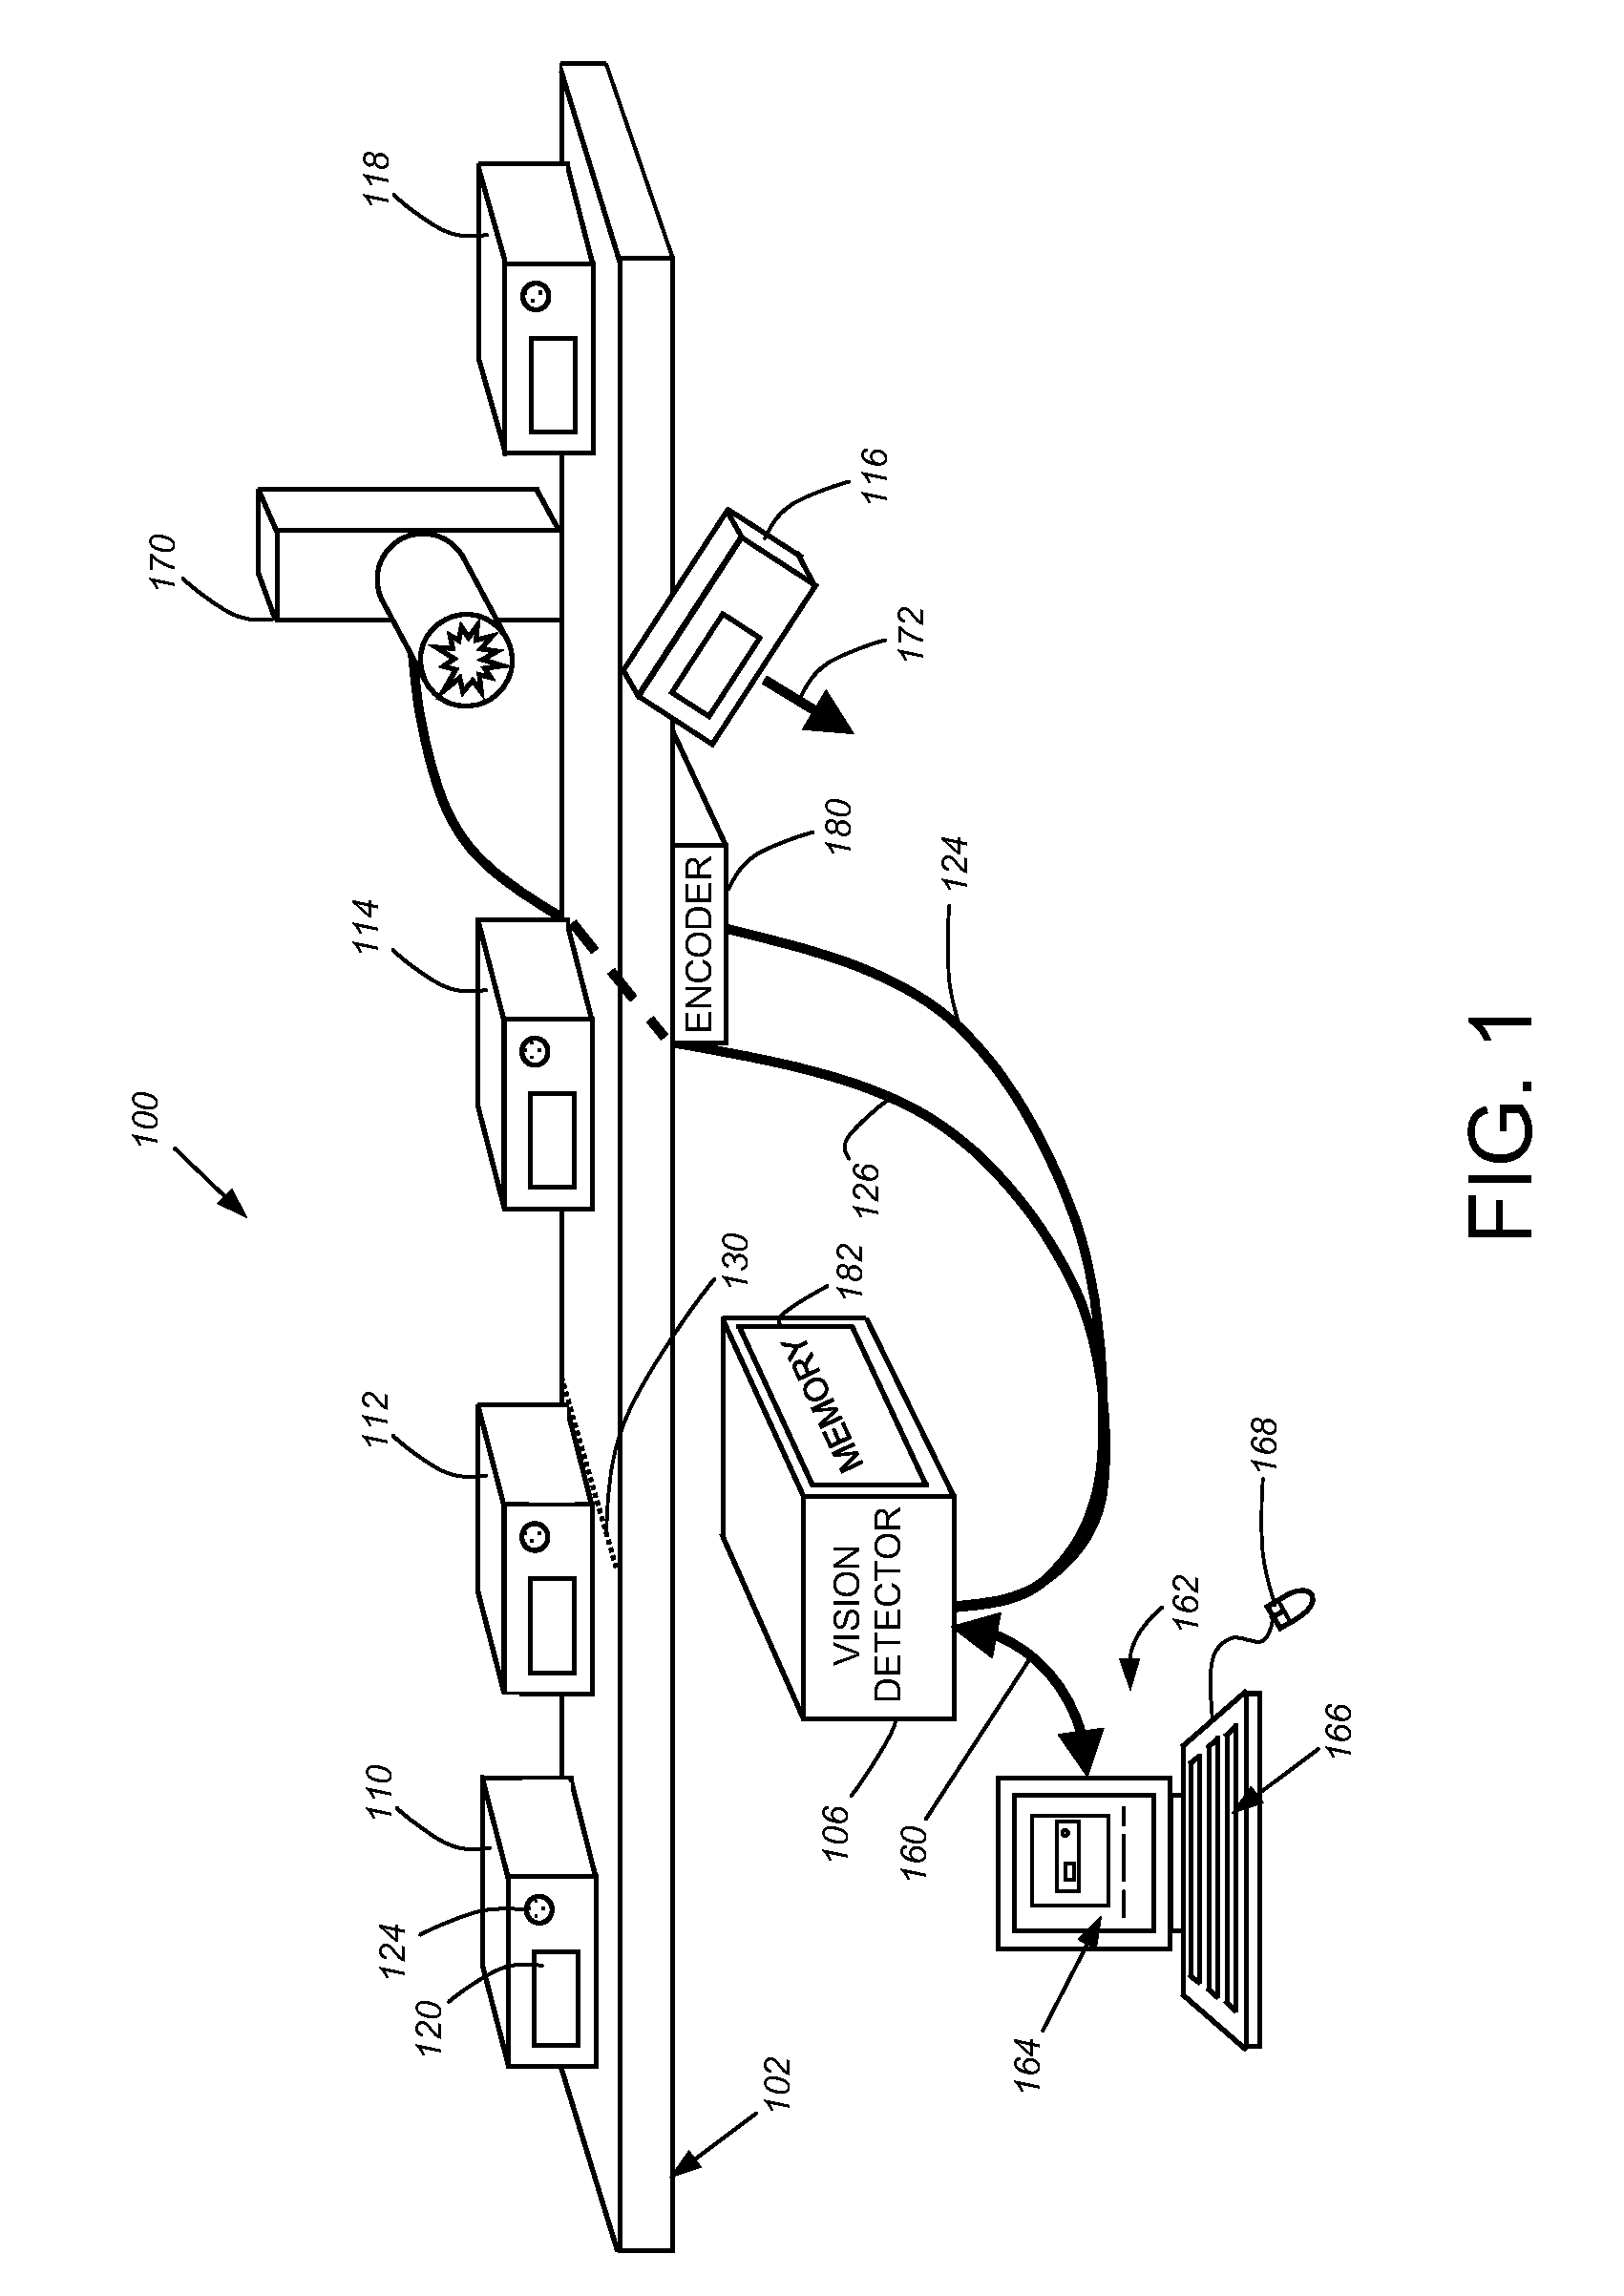 Human-machine-interface and method for manipulating data in a machine vision system